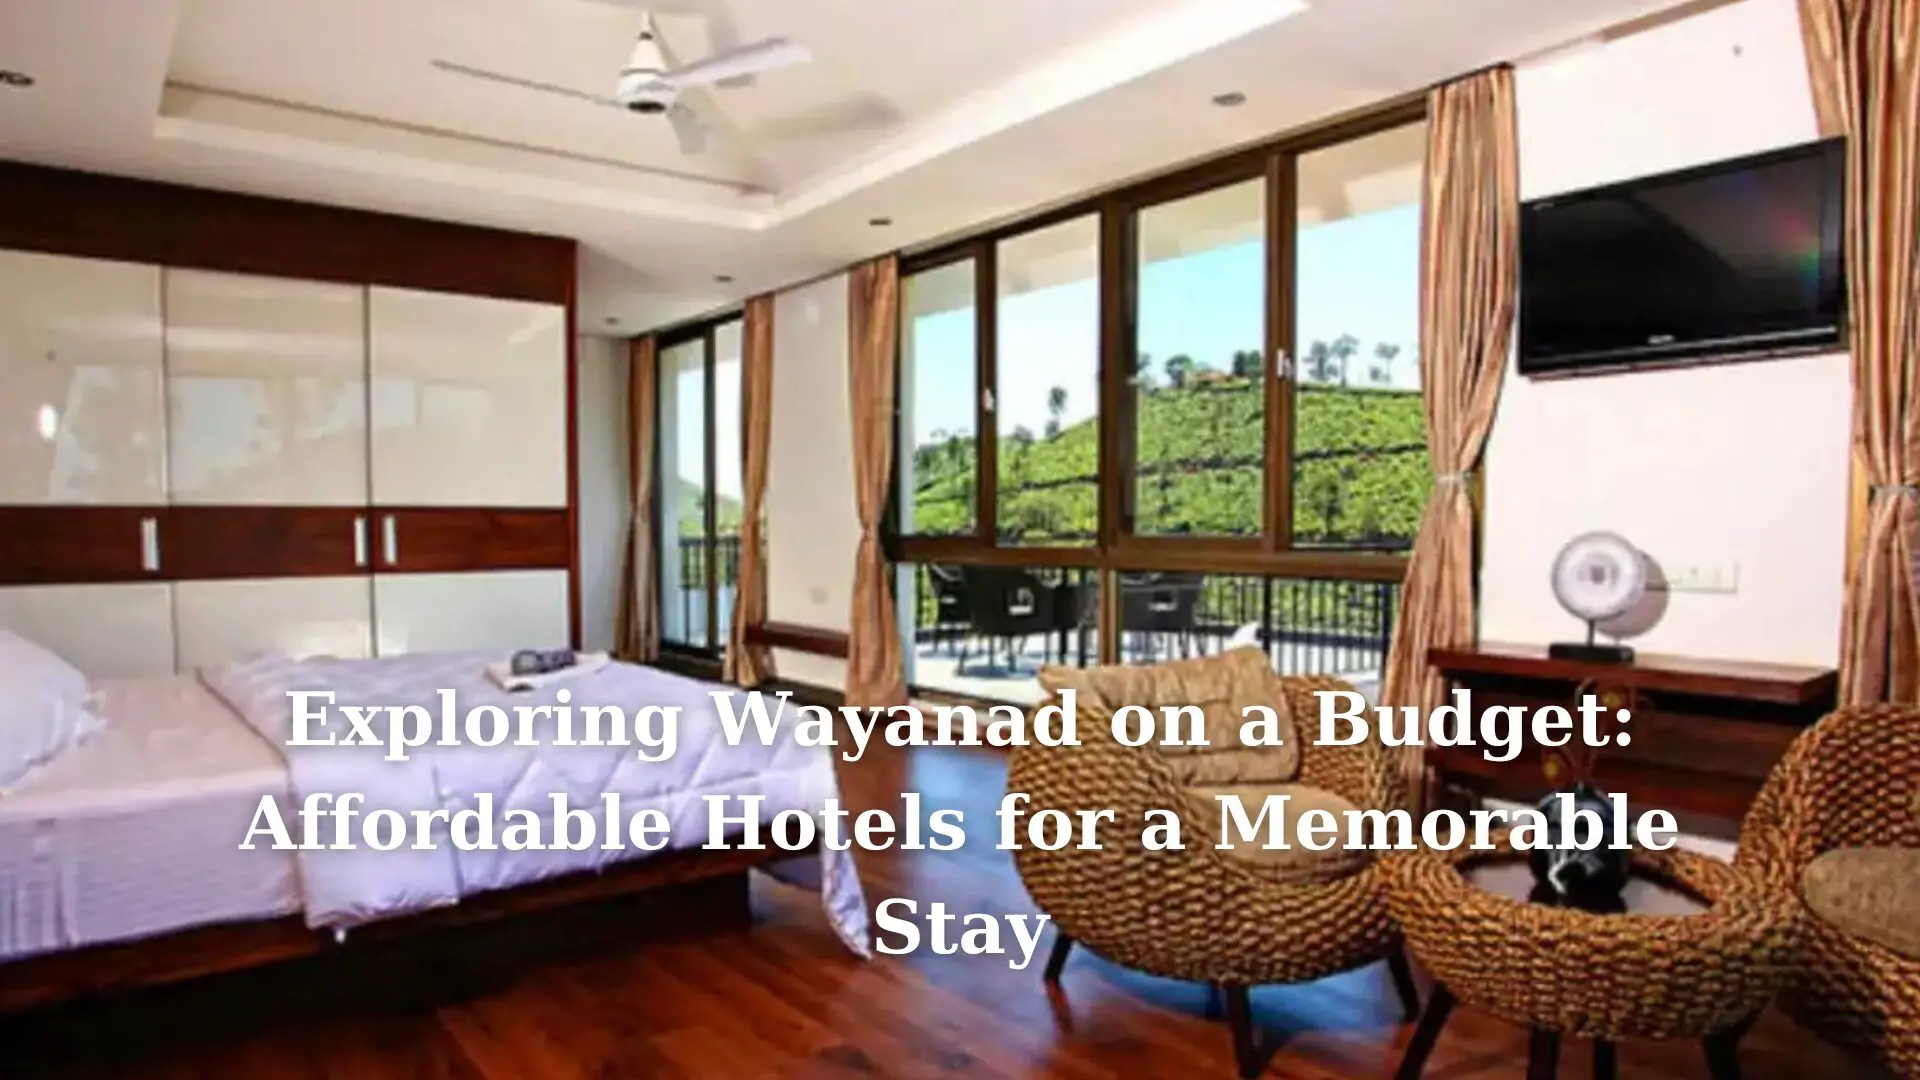 Exploring Wayanad on a Budget: Affordable Hotels for a Memorable Stay